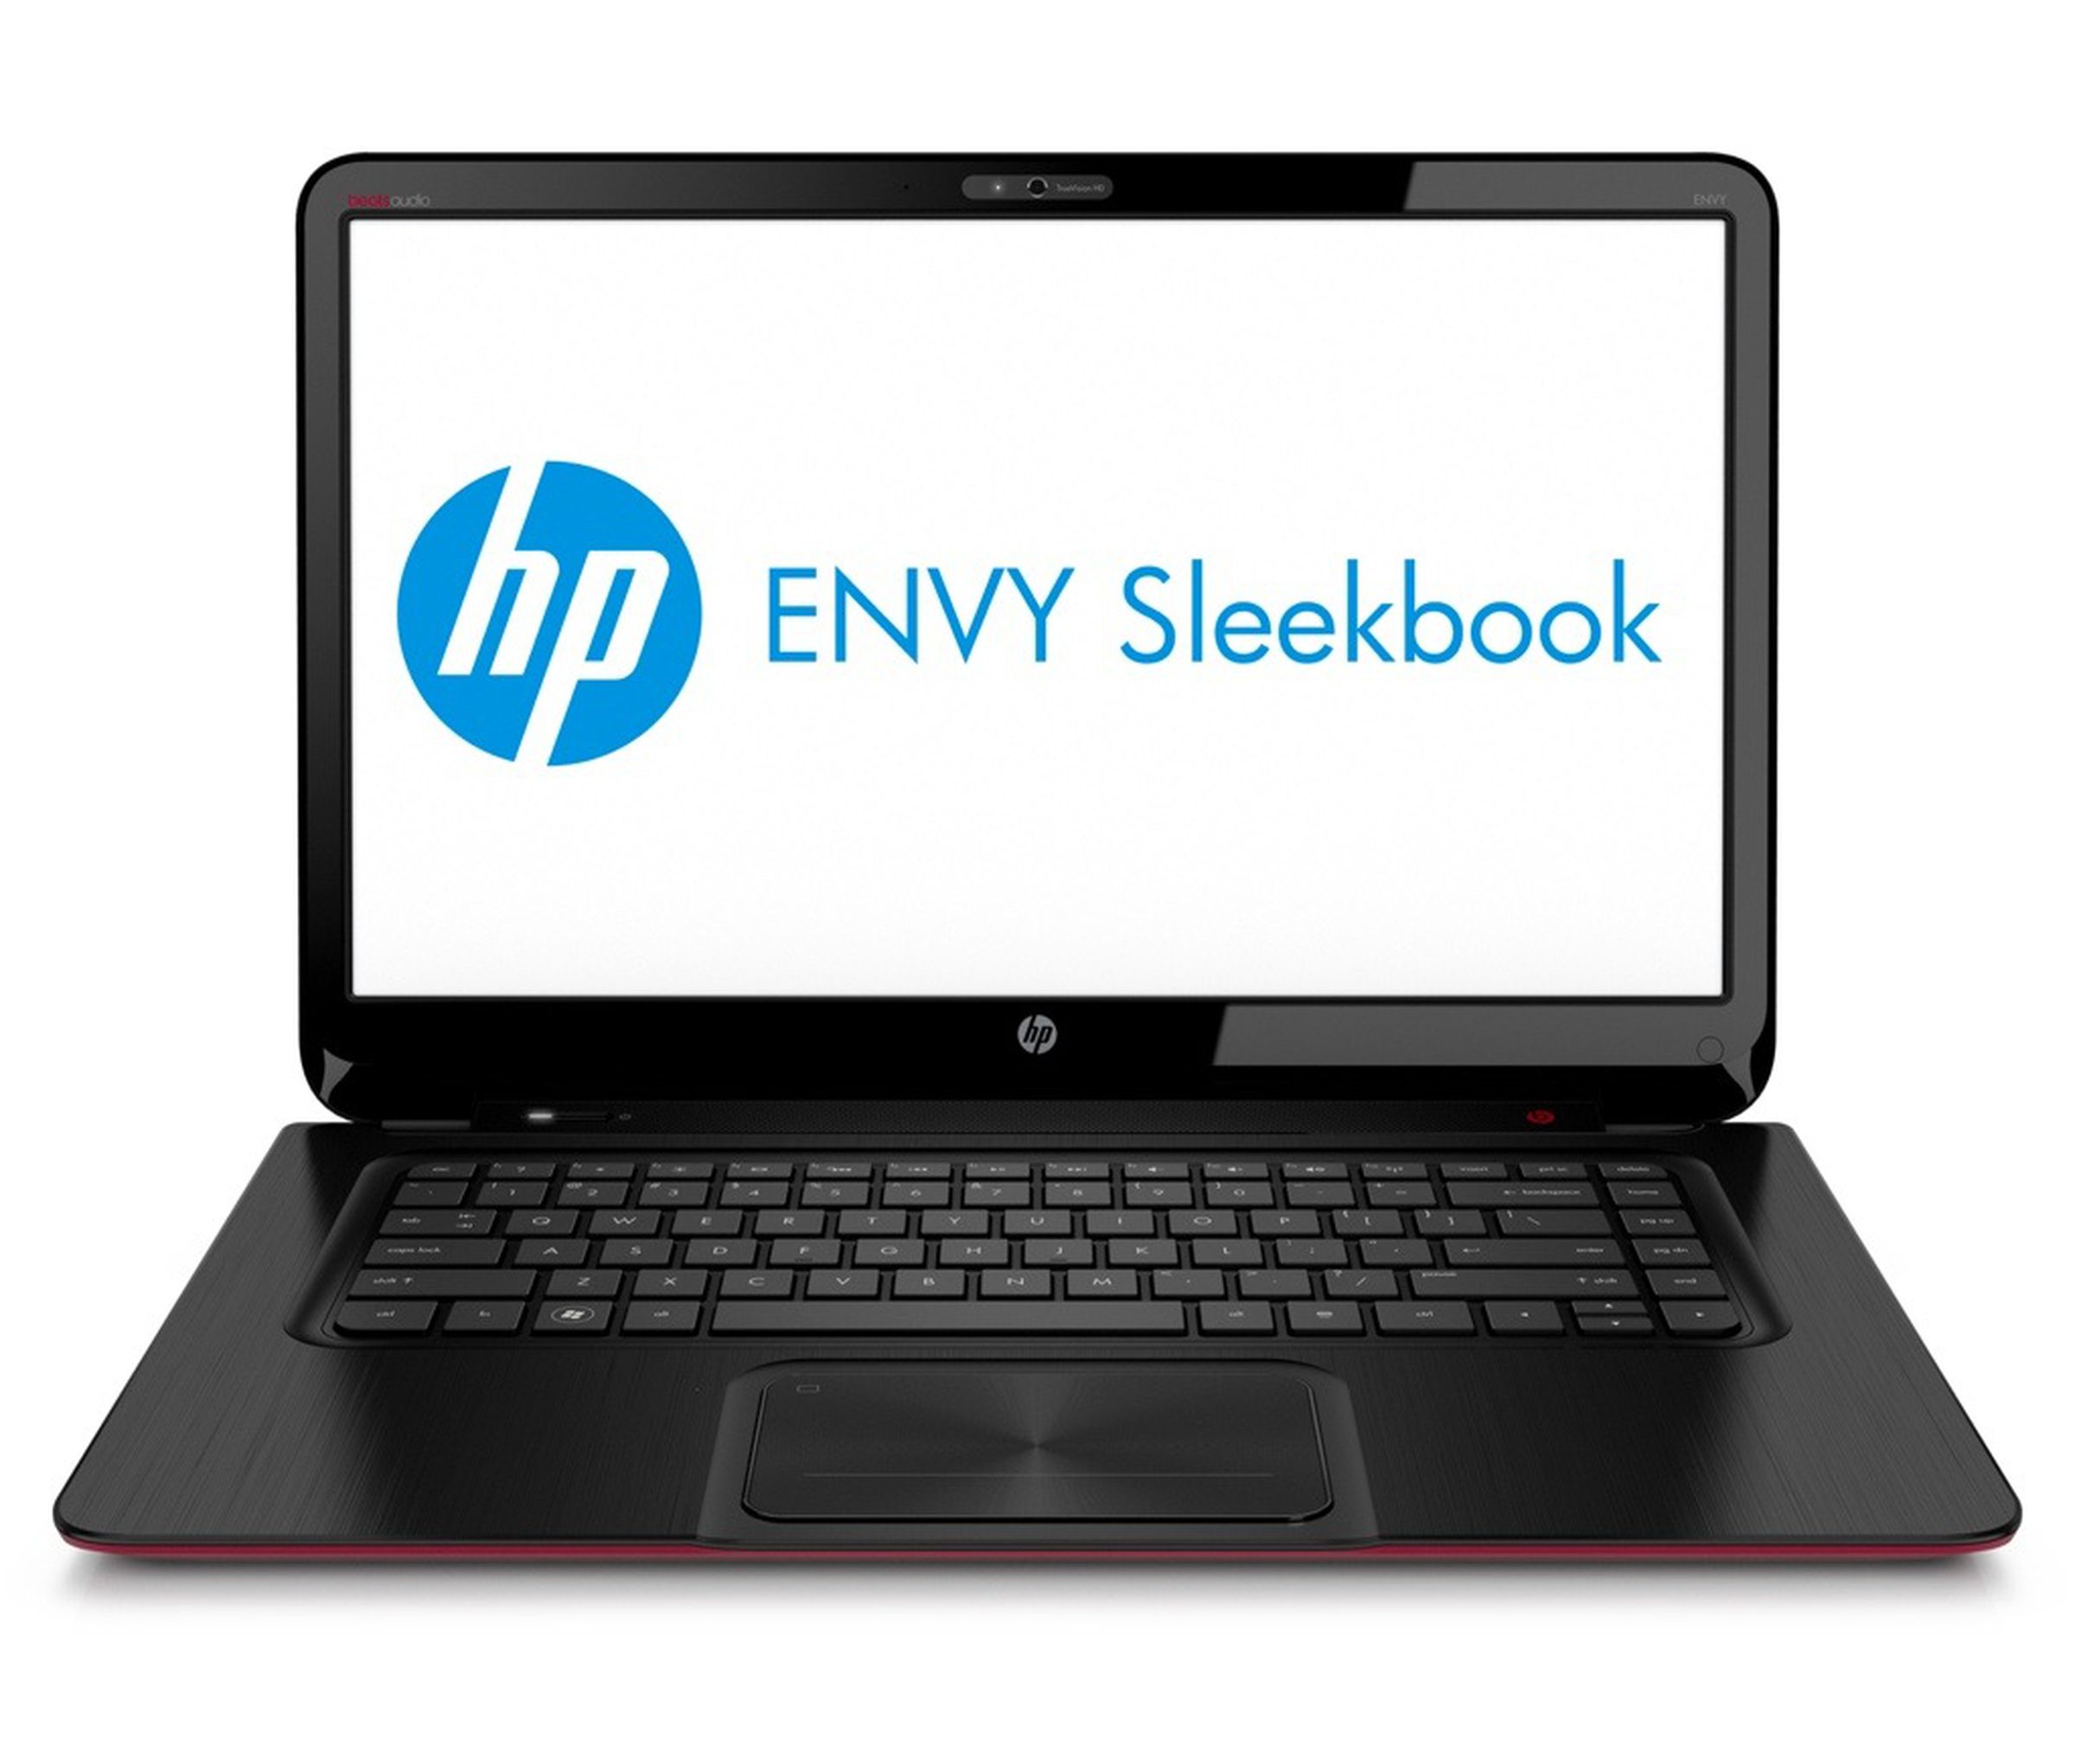 HP Envy Sleekbook and Envy Ultrabook press pictures